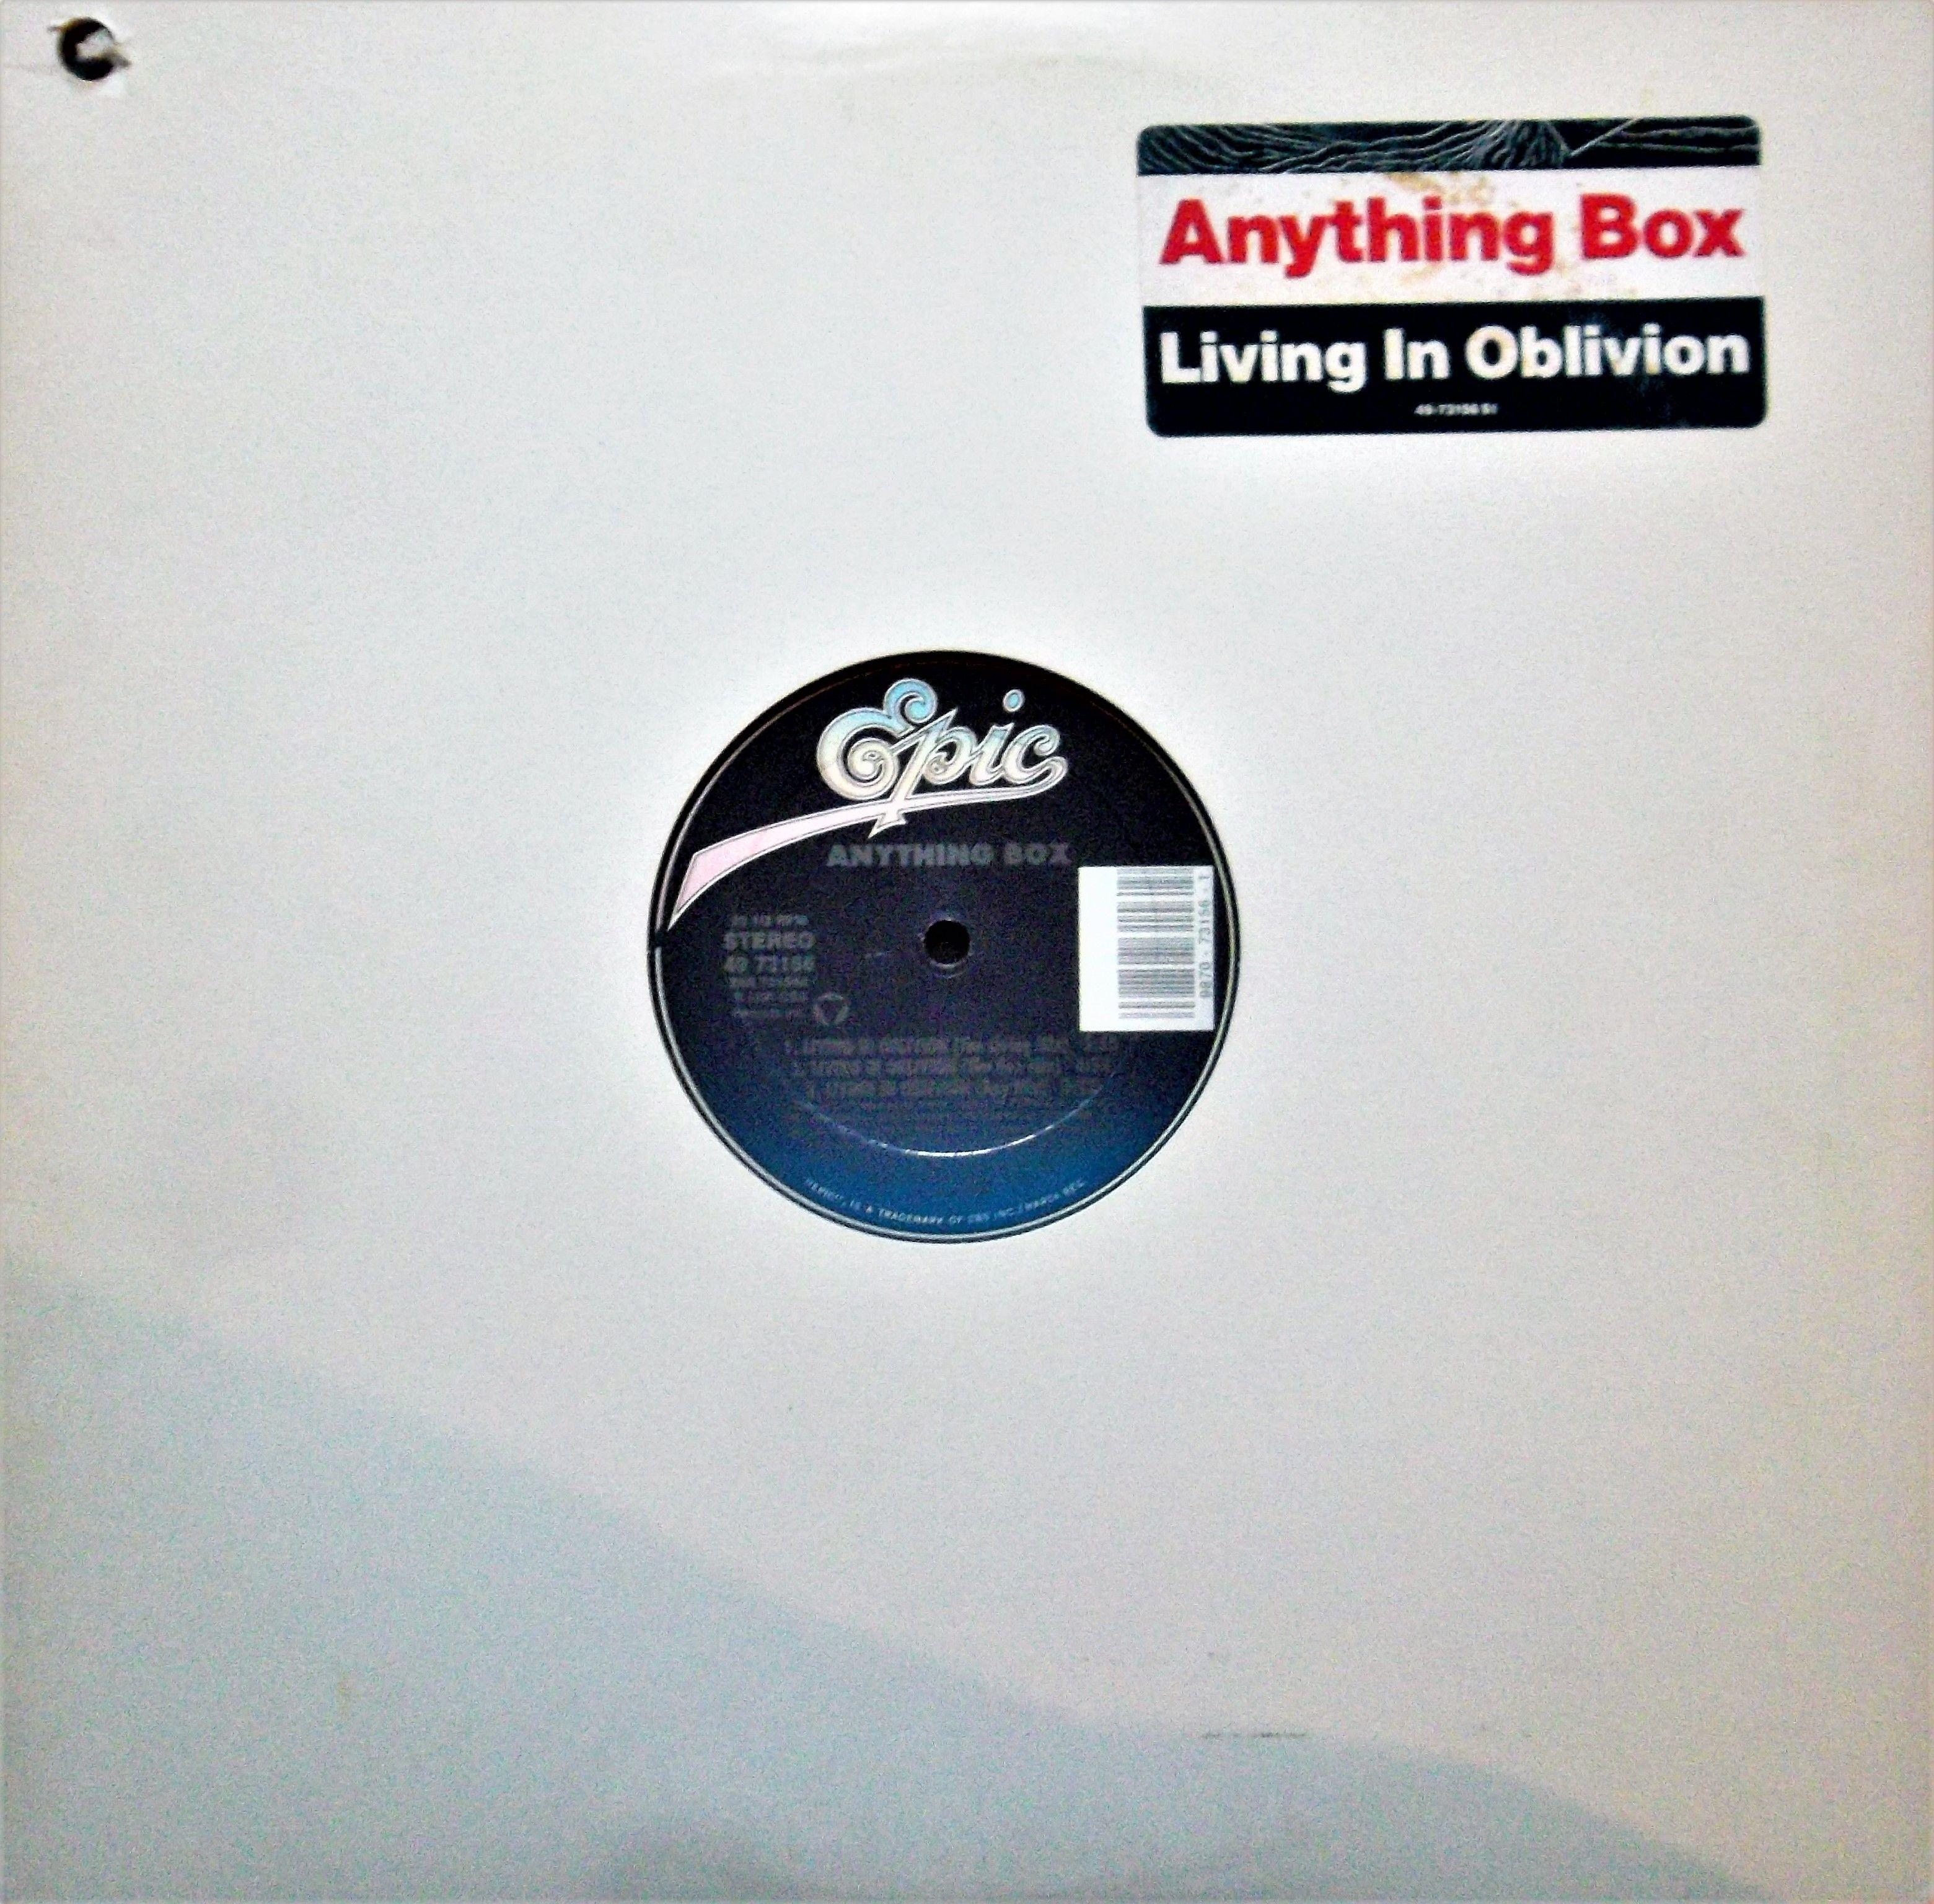 Anything Box Logo - Anything Box – Living In Oblivion (US 12″) | myvinyldreams